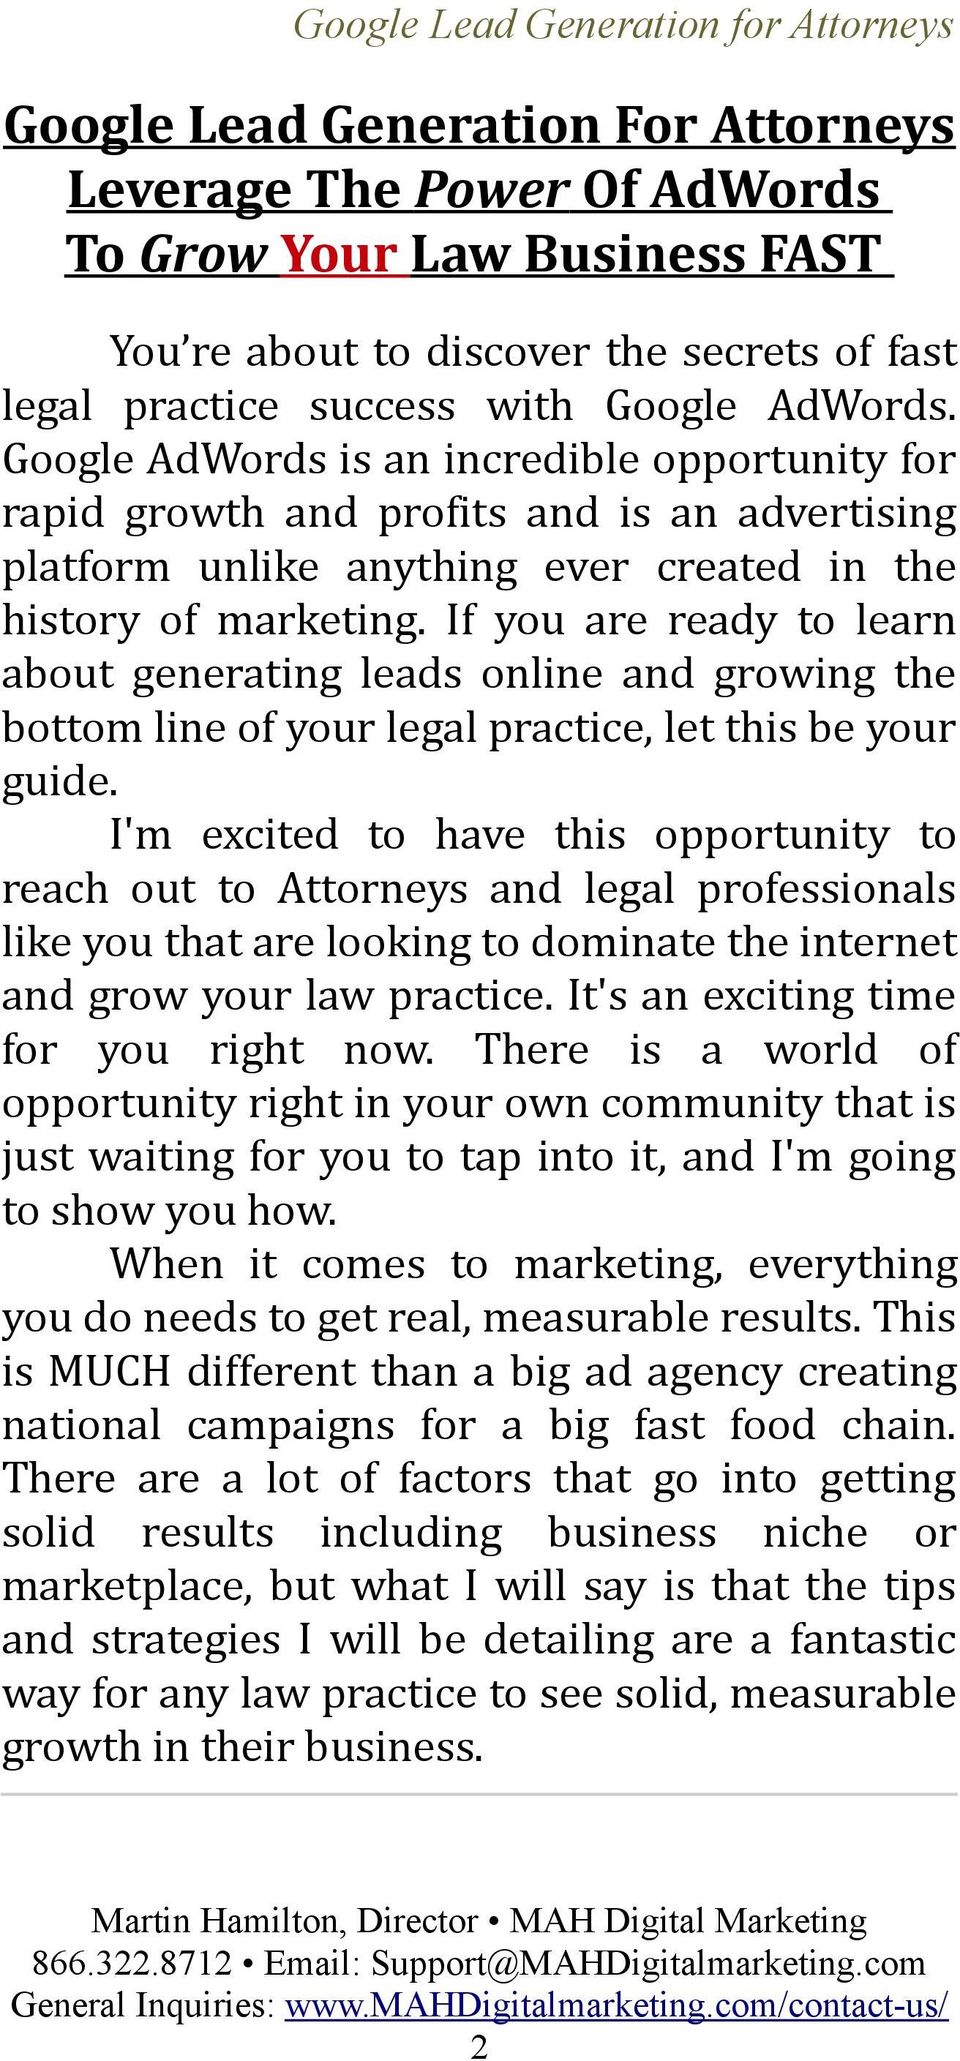 If you are ready to learn about generating leads online and growing the bottom line of your legal practice, let this be your guide.